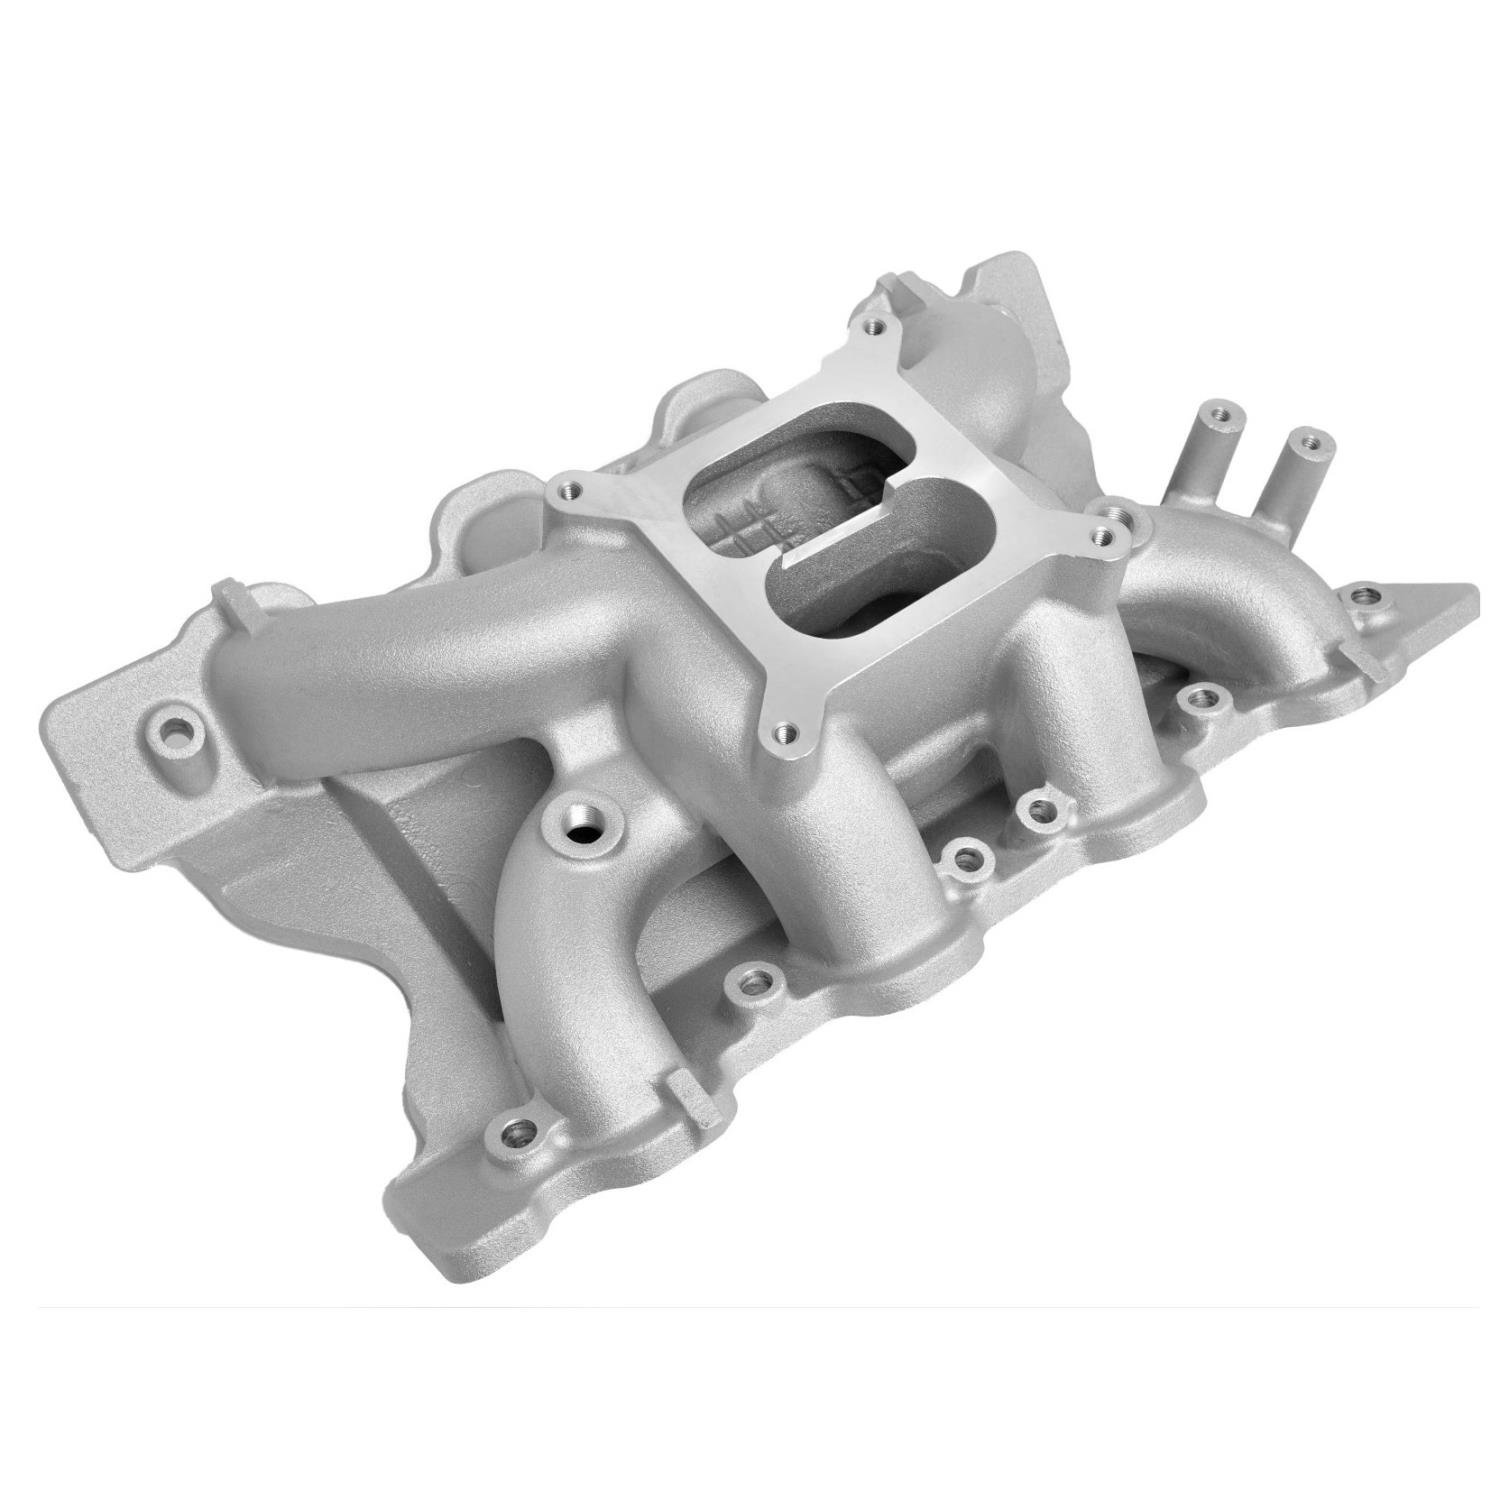 Aluminum Cooling Gap Dual-Plane Intake Manifold for 1970-1986 Ford 351 Cleveland [Satin]